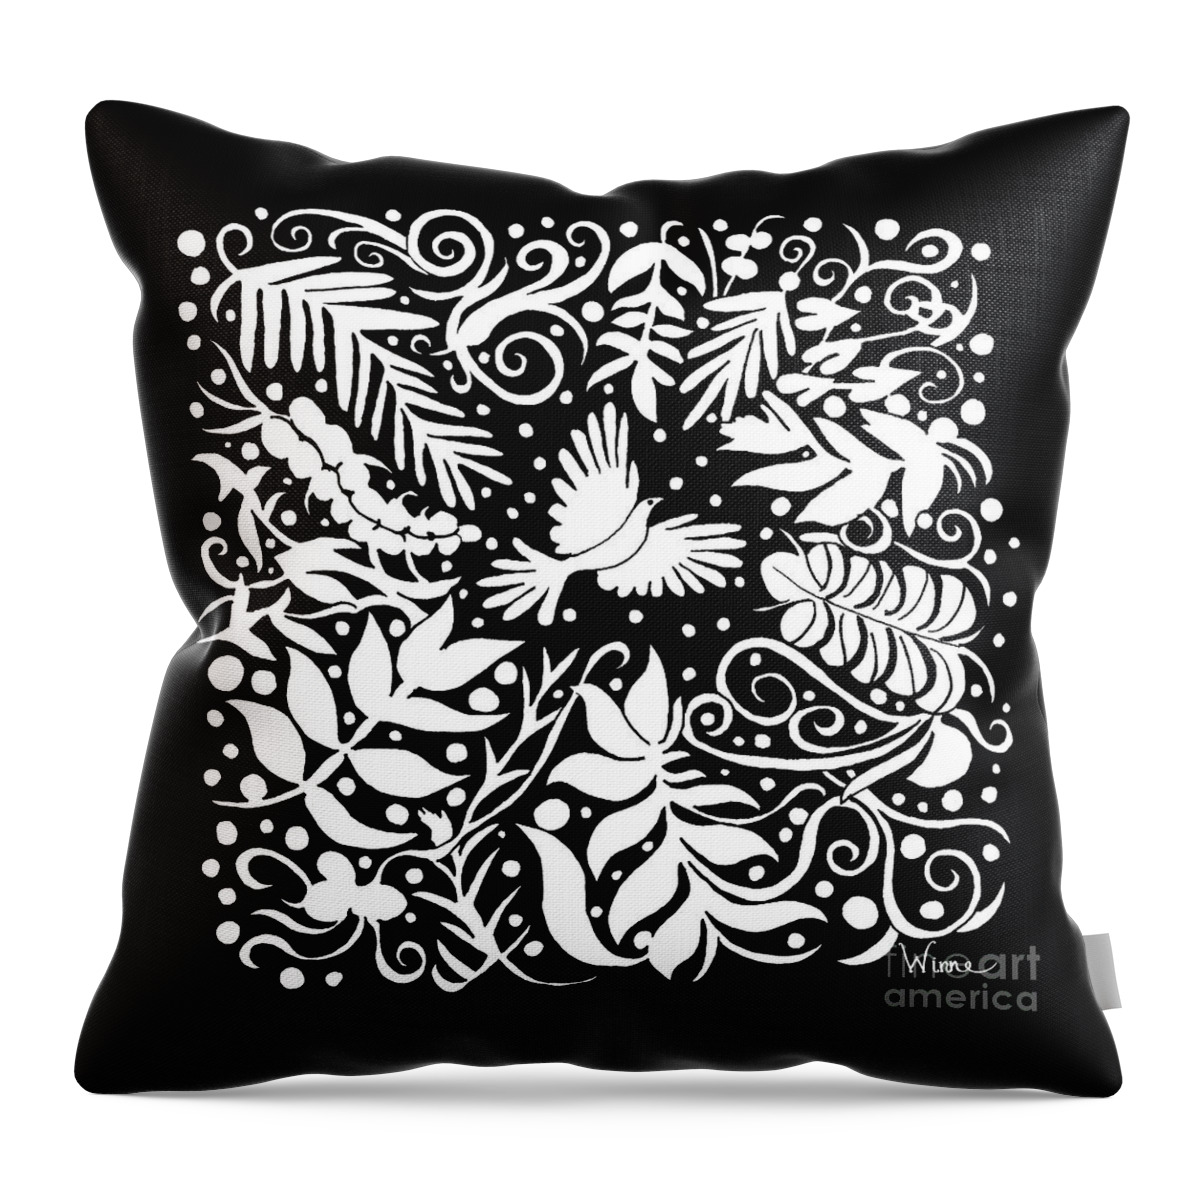 Lise Winne Throw Pillow featuring the drawing A Break in the Foliage by Lise Winne